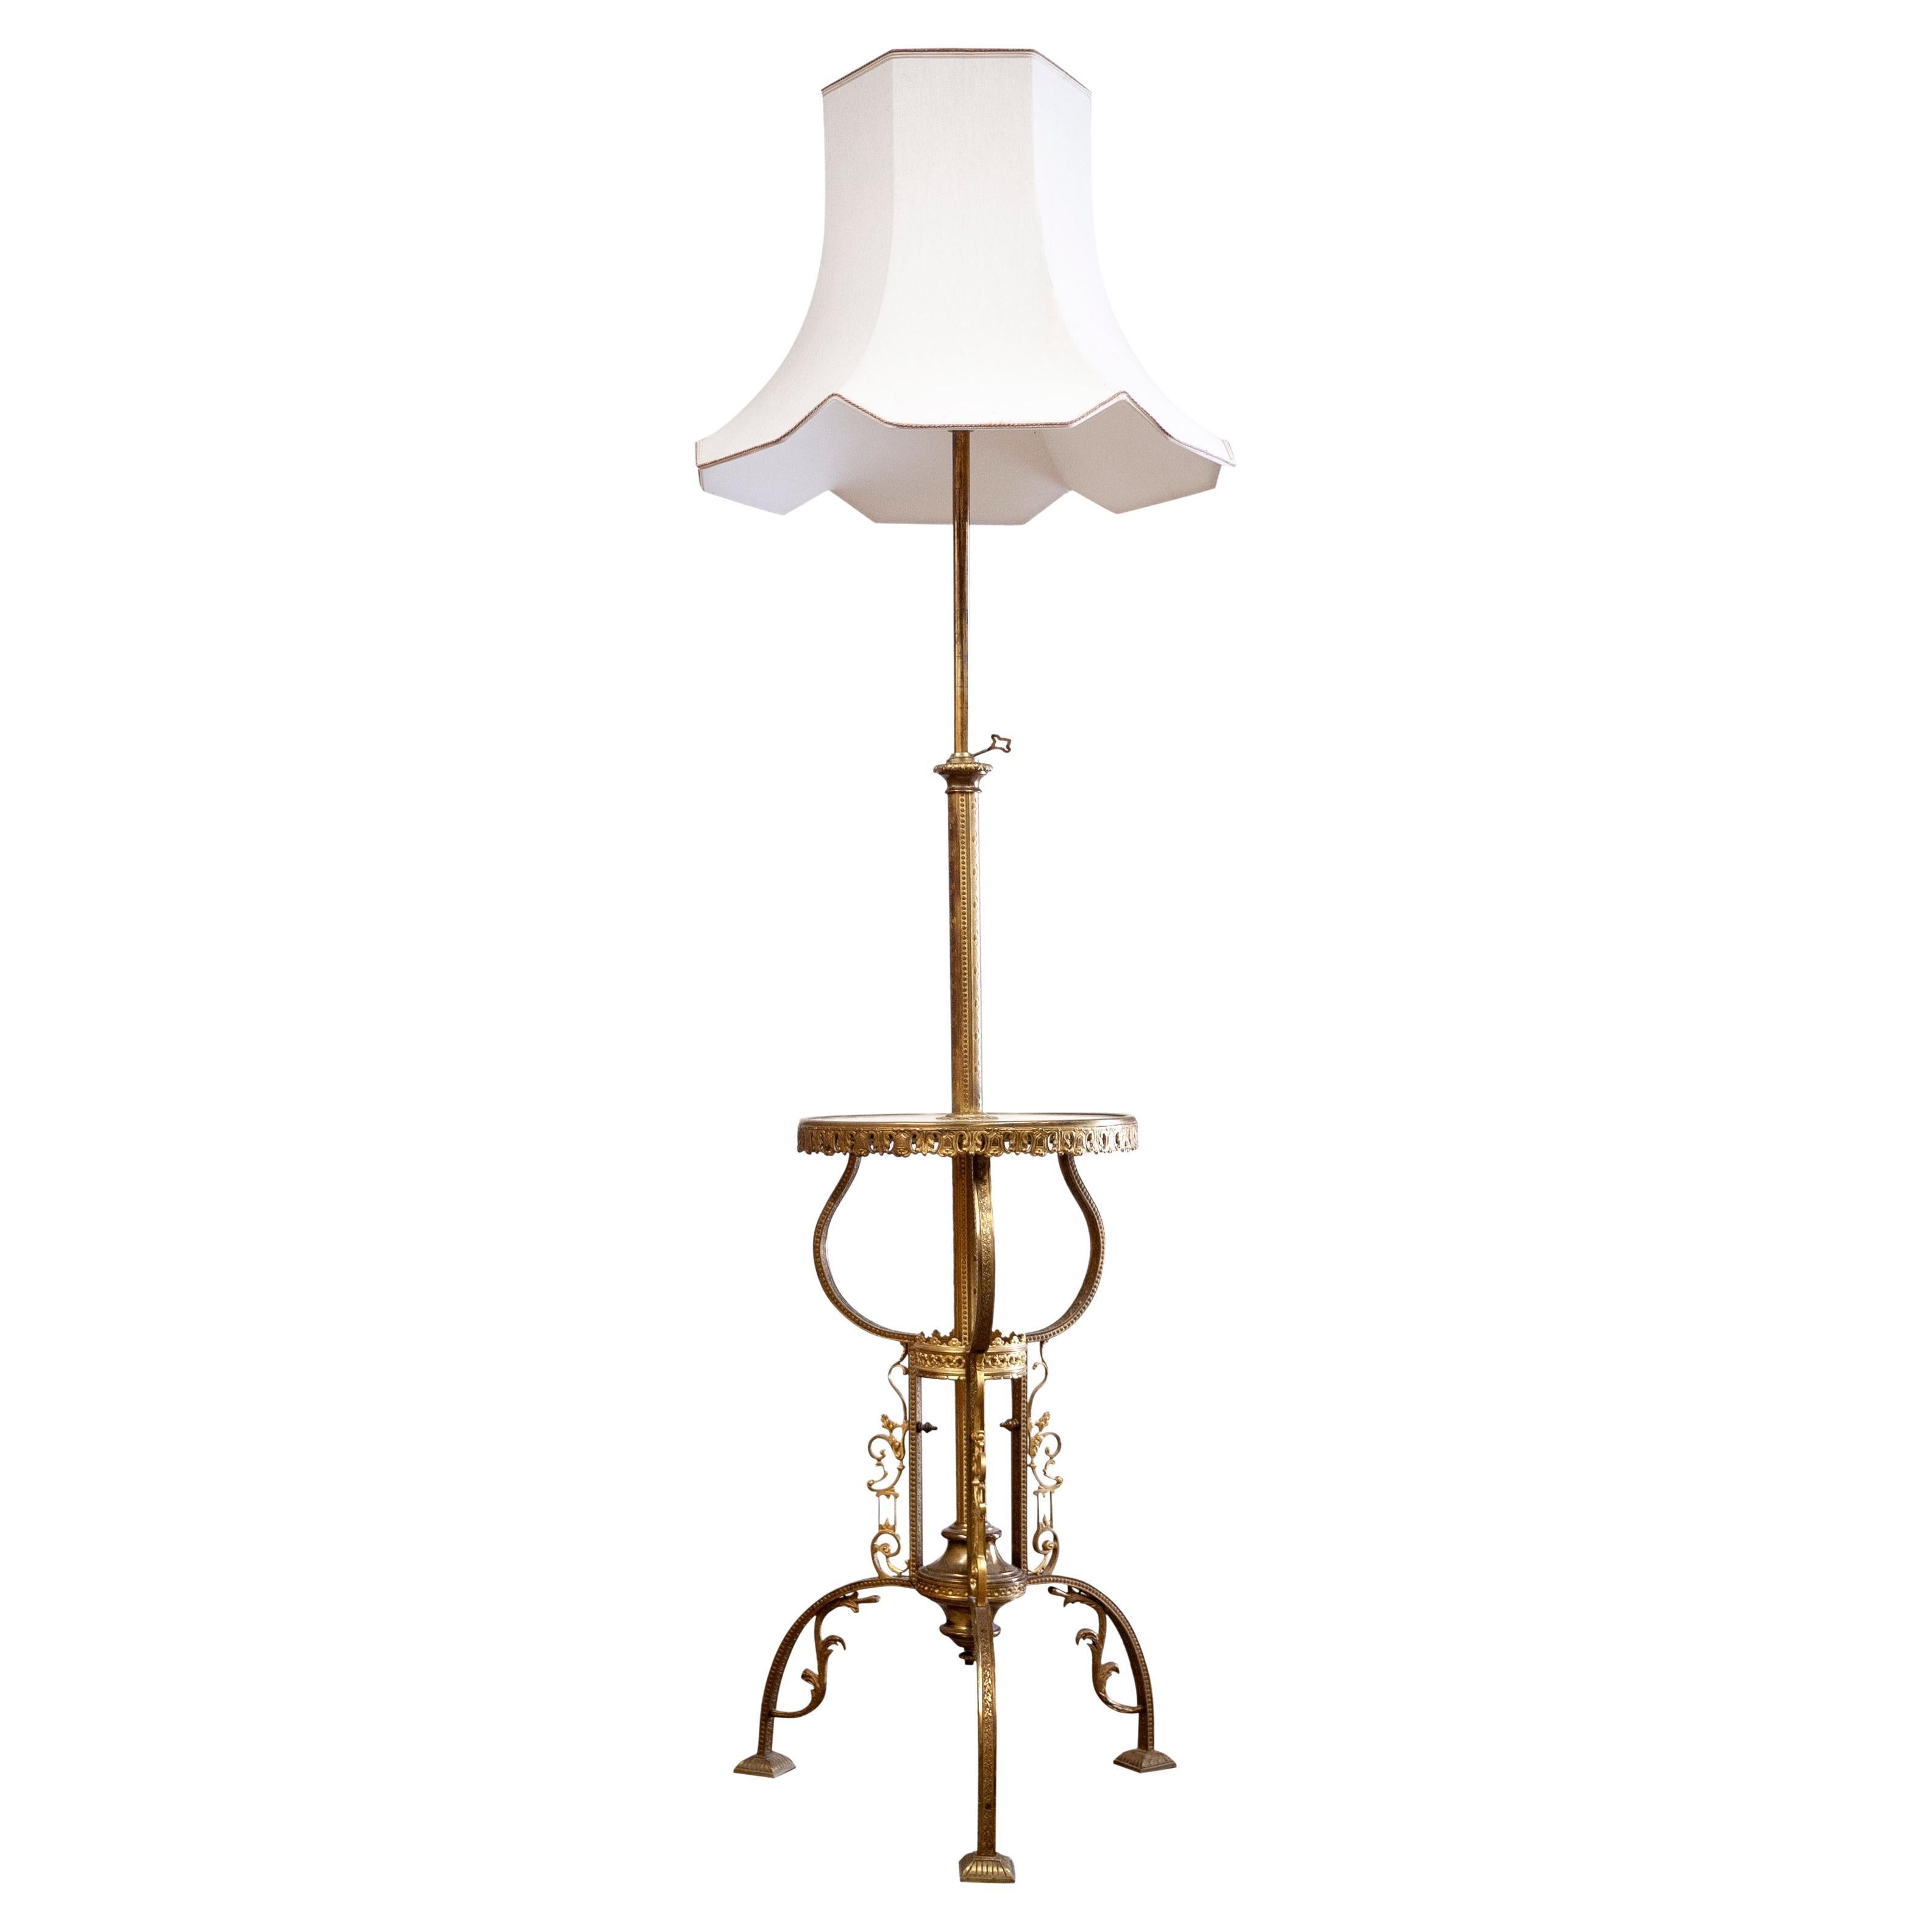 Vintage French Brass and Onyx Floor Lamp, 1930s For Sale